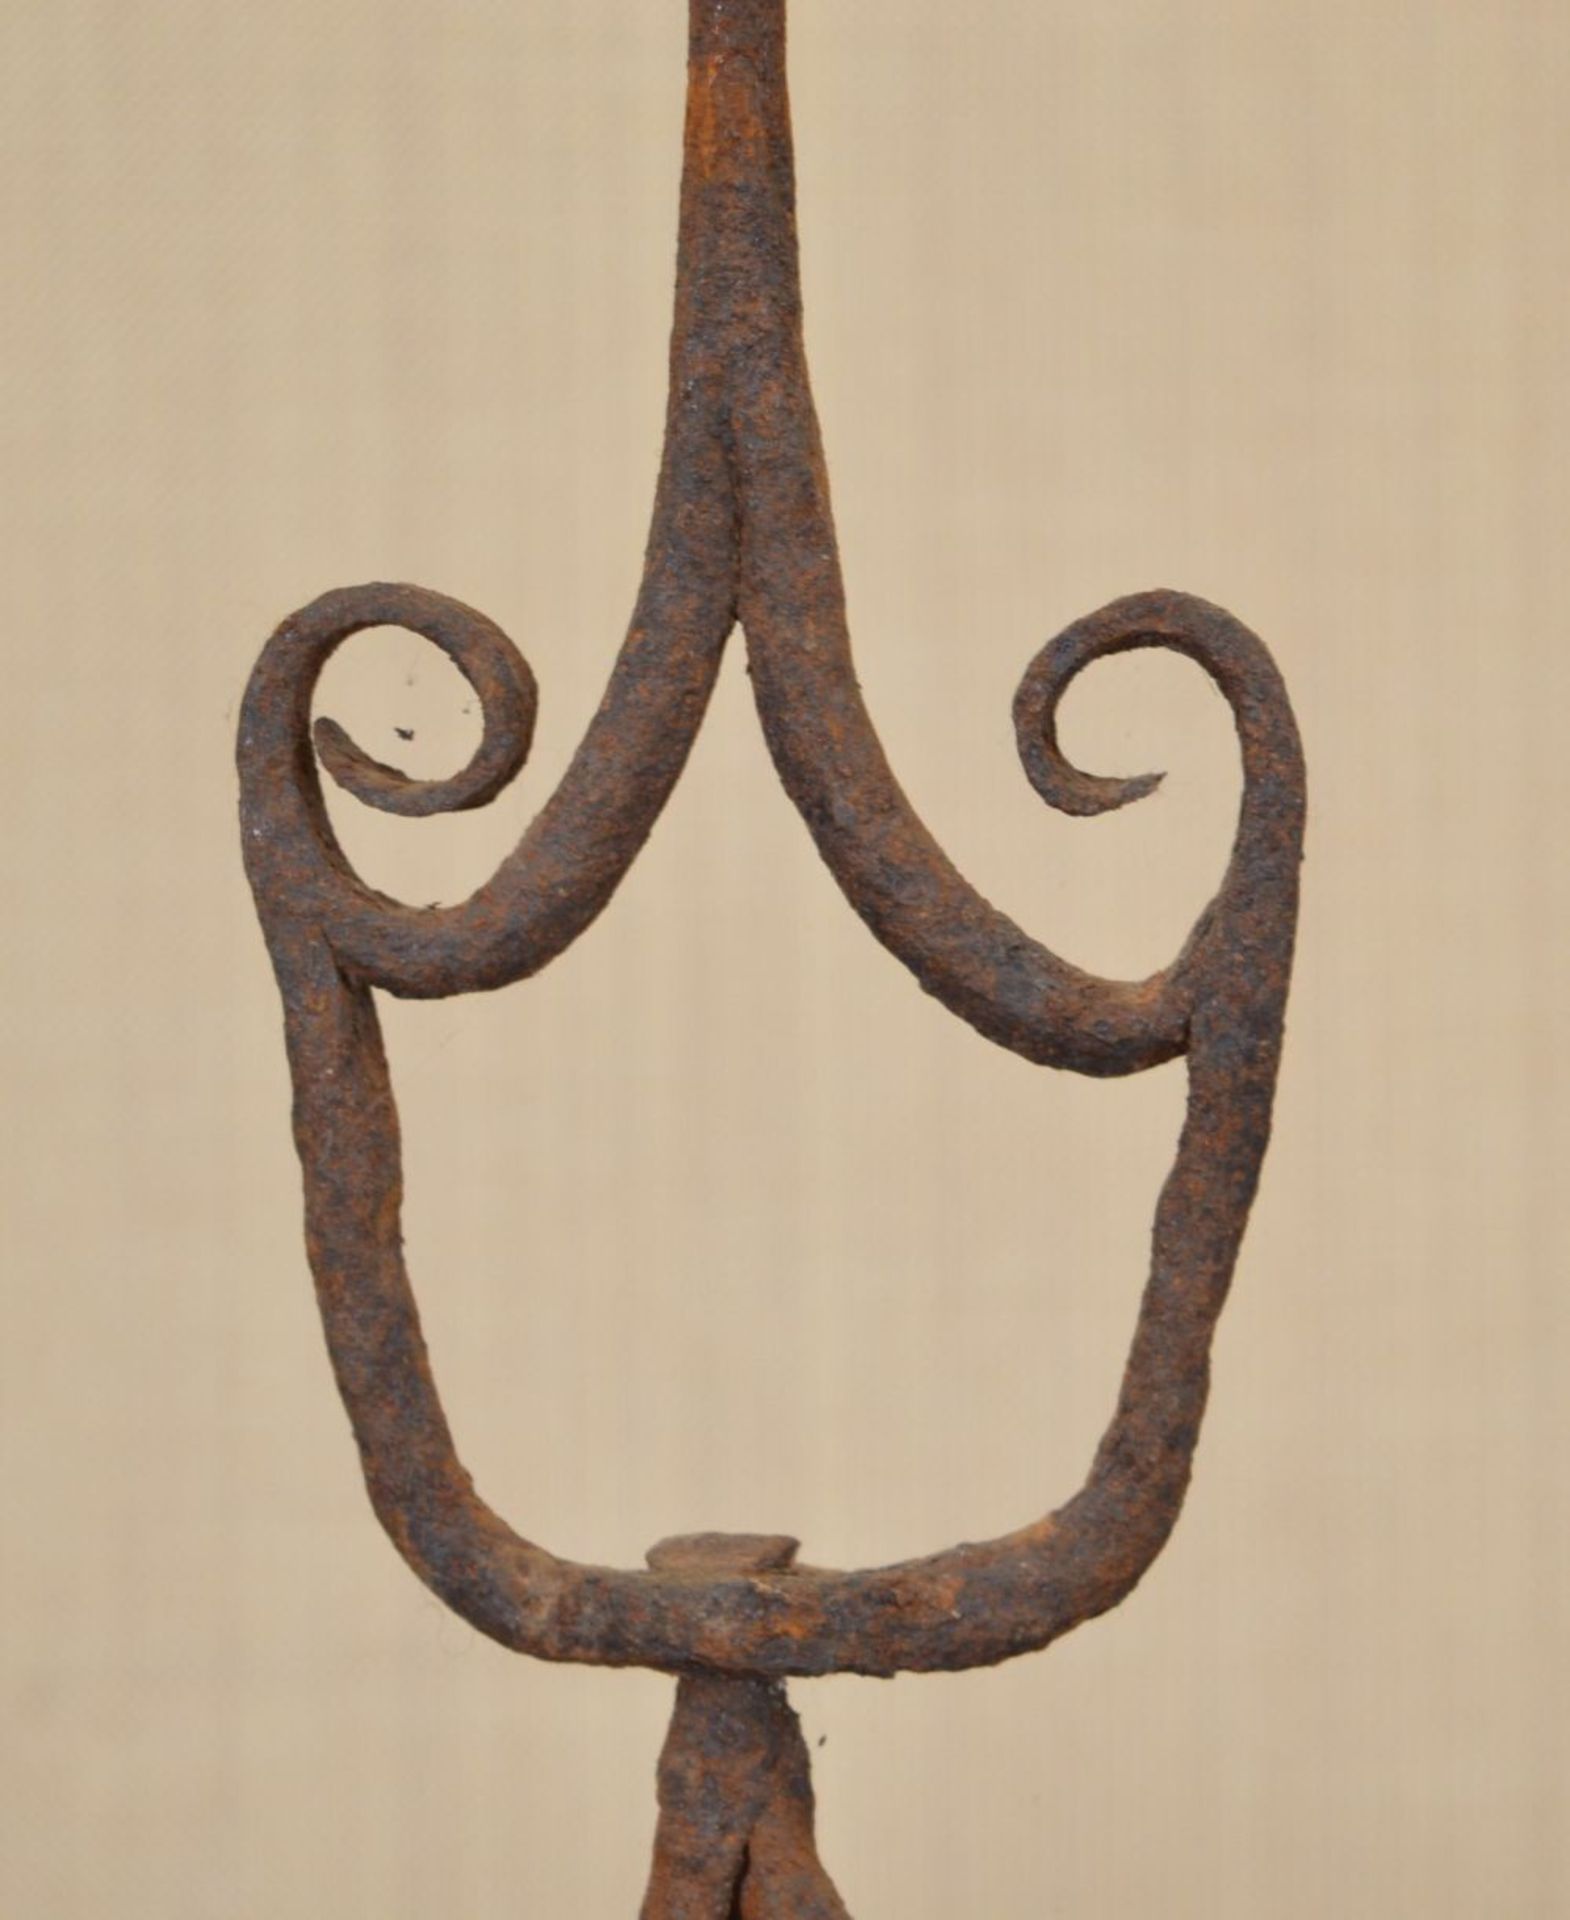 EARLY 19TH-CENTURY FORGED IRON FLOOR STANDING RUSH LIGHT - Image 3 of 3